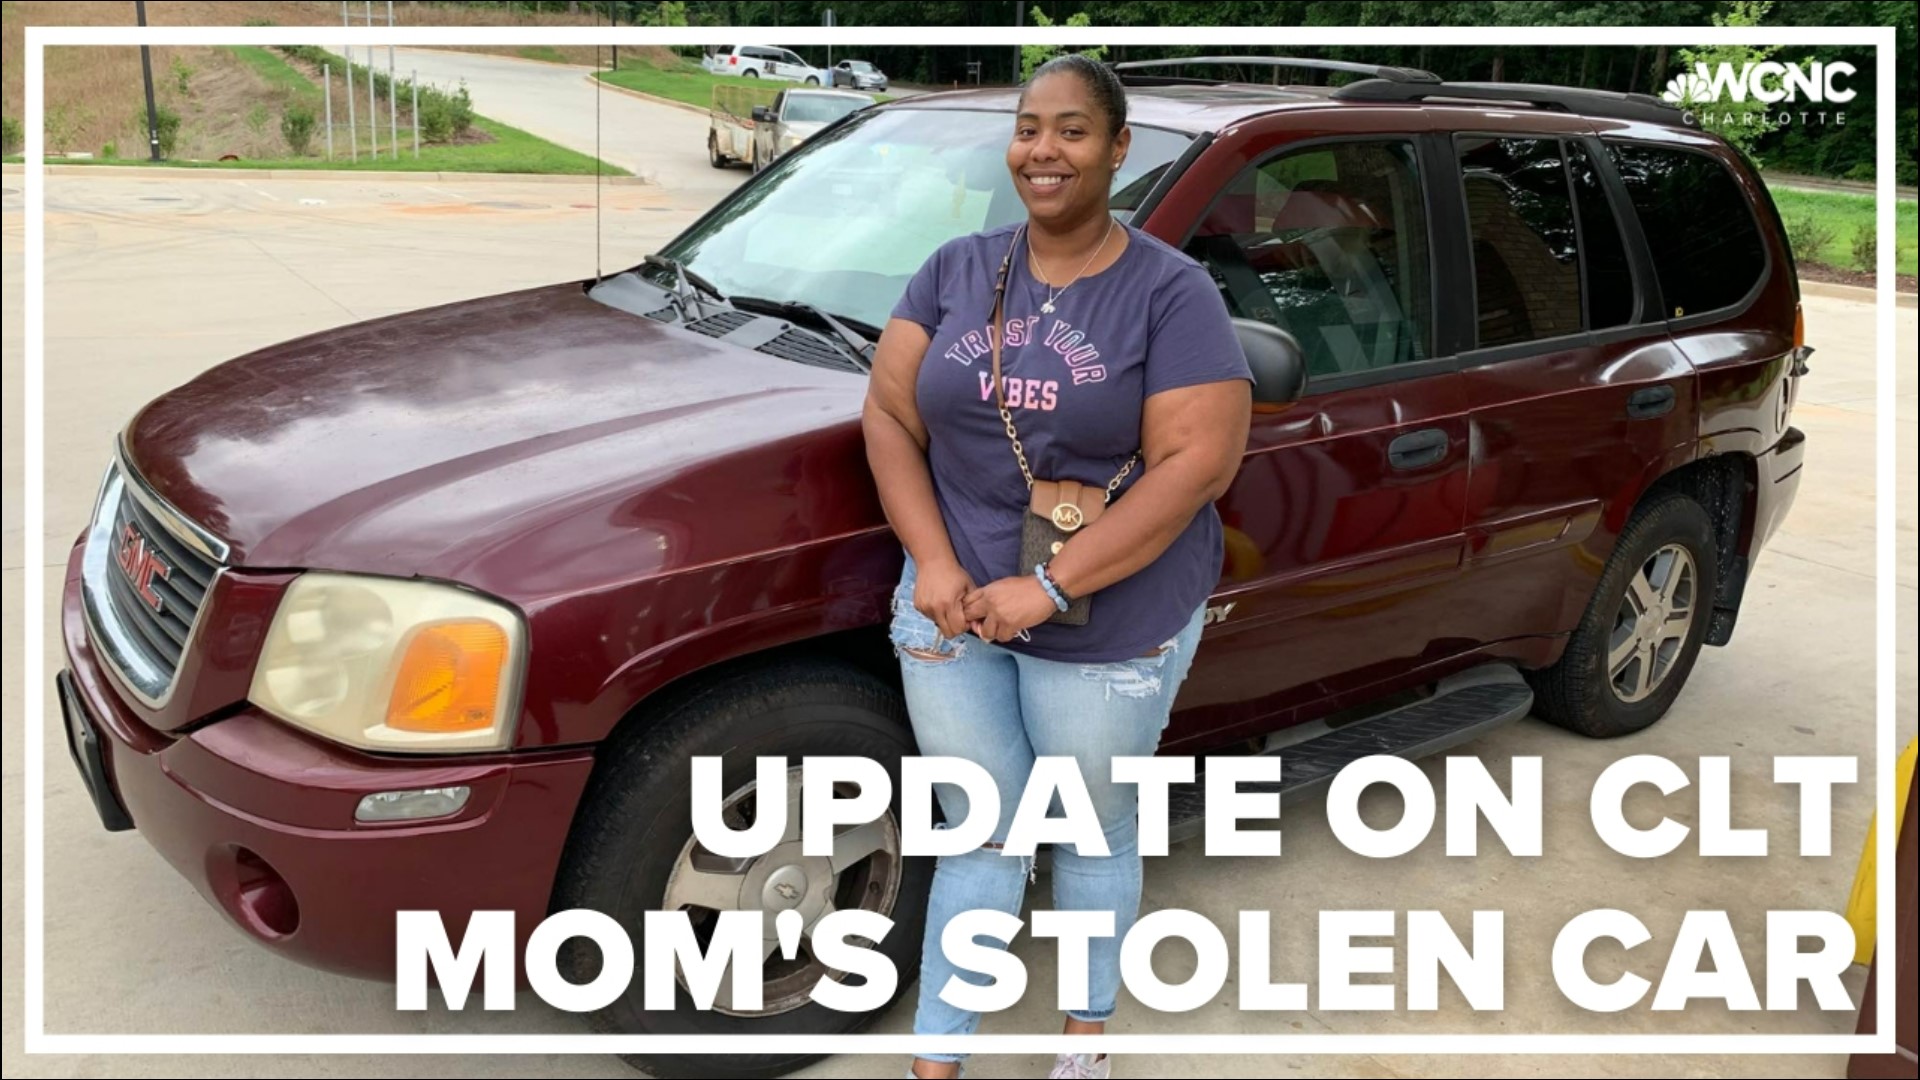 An anonymous donor from Columbia gave their car to this mother in need